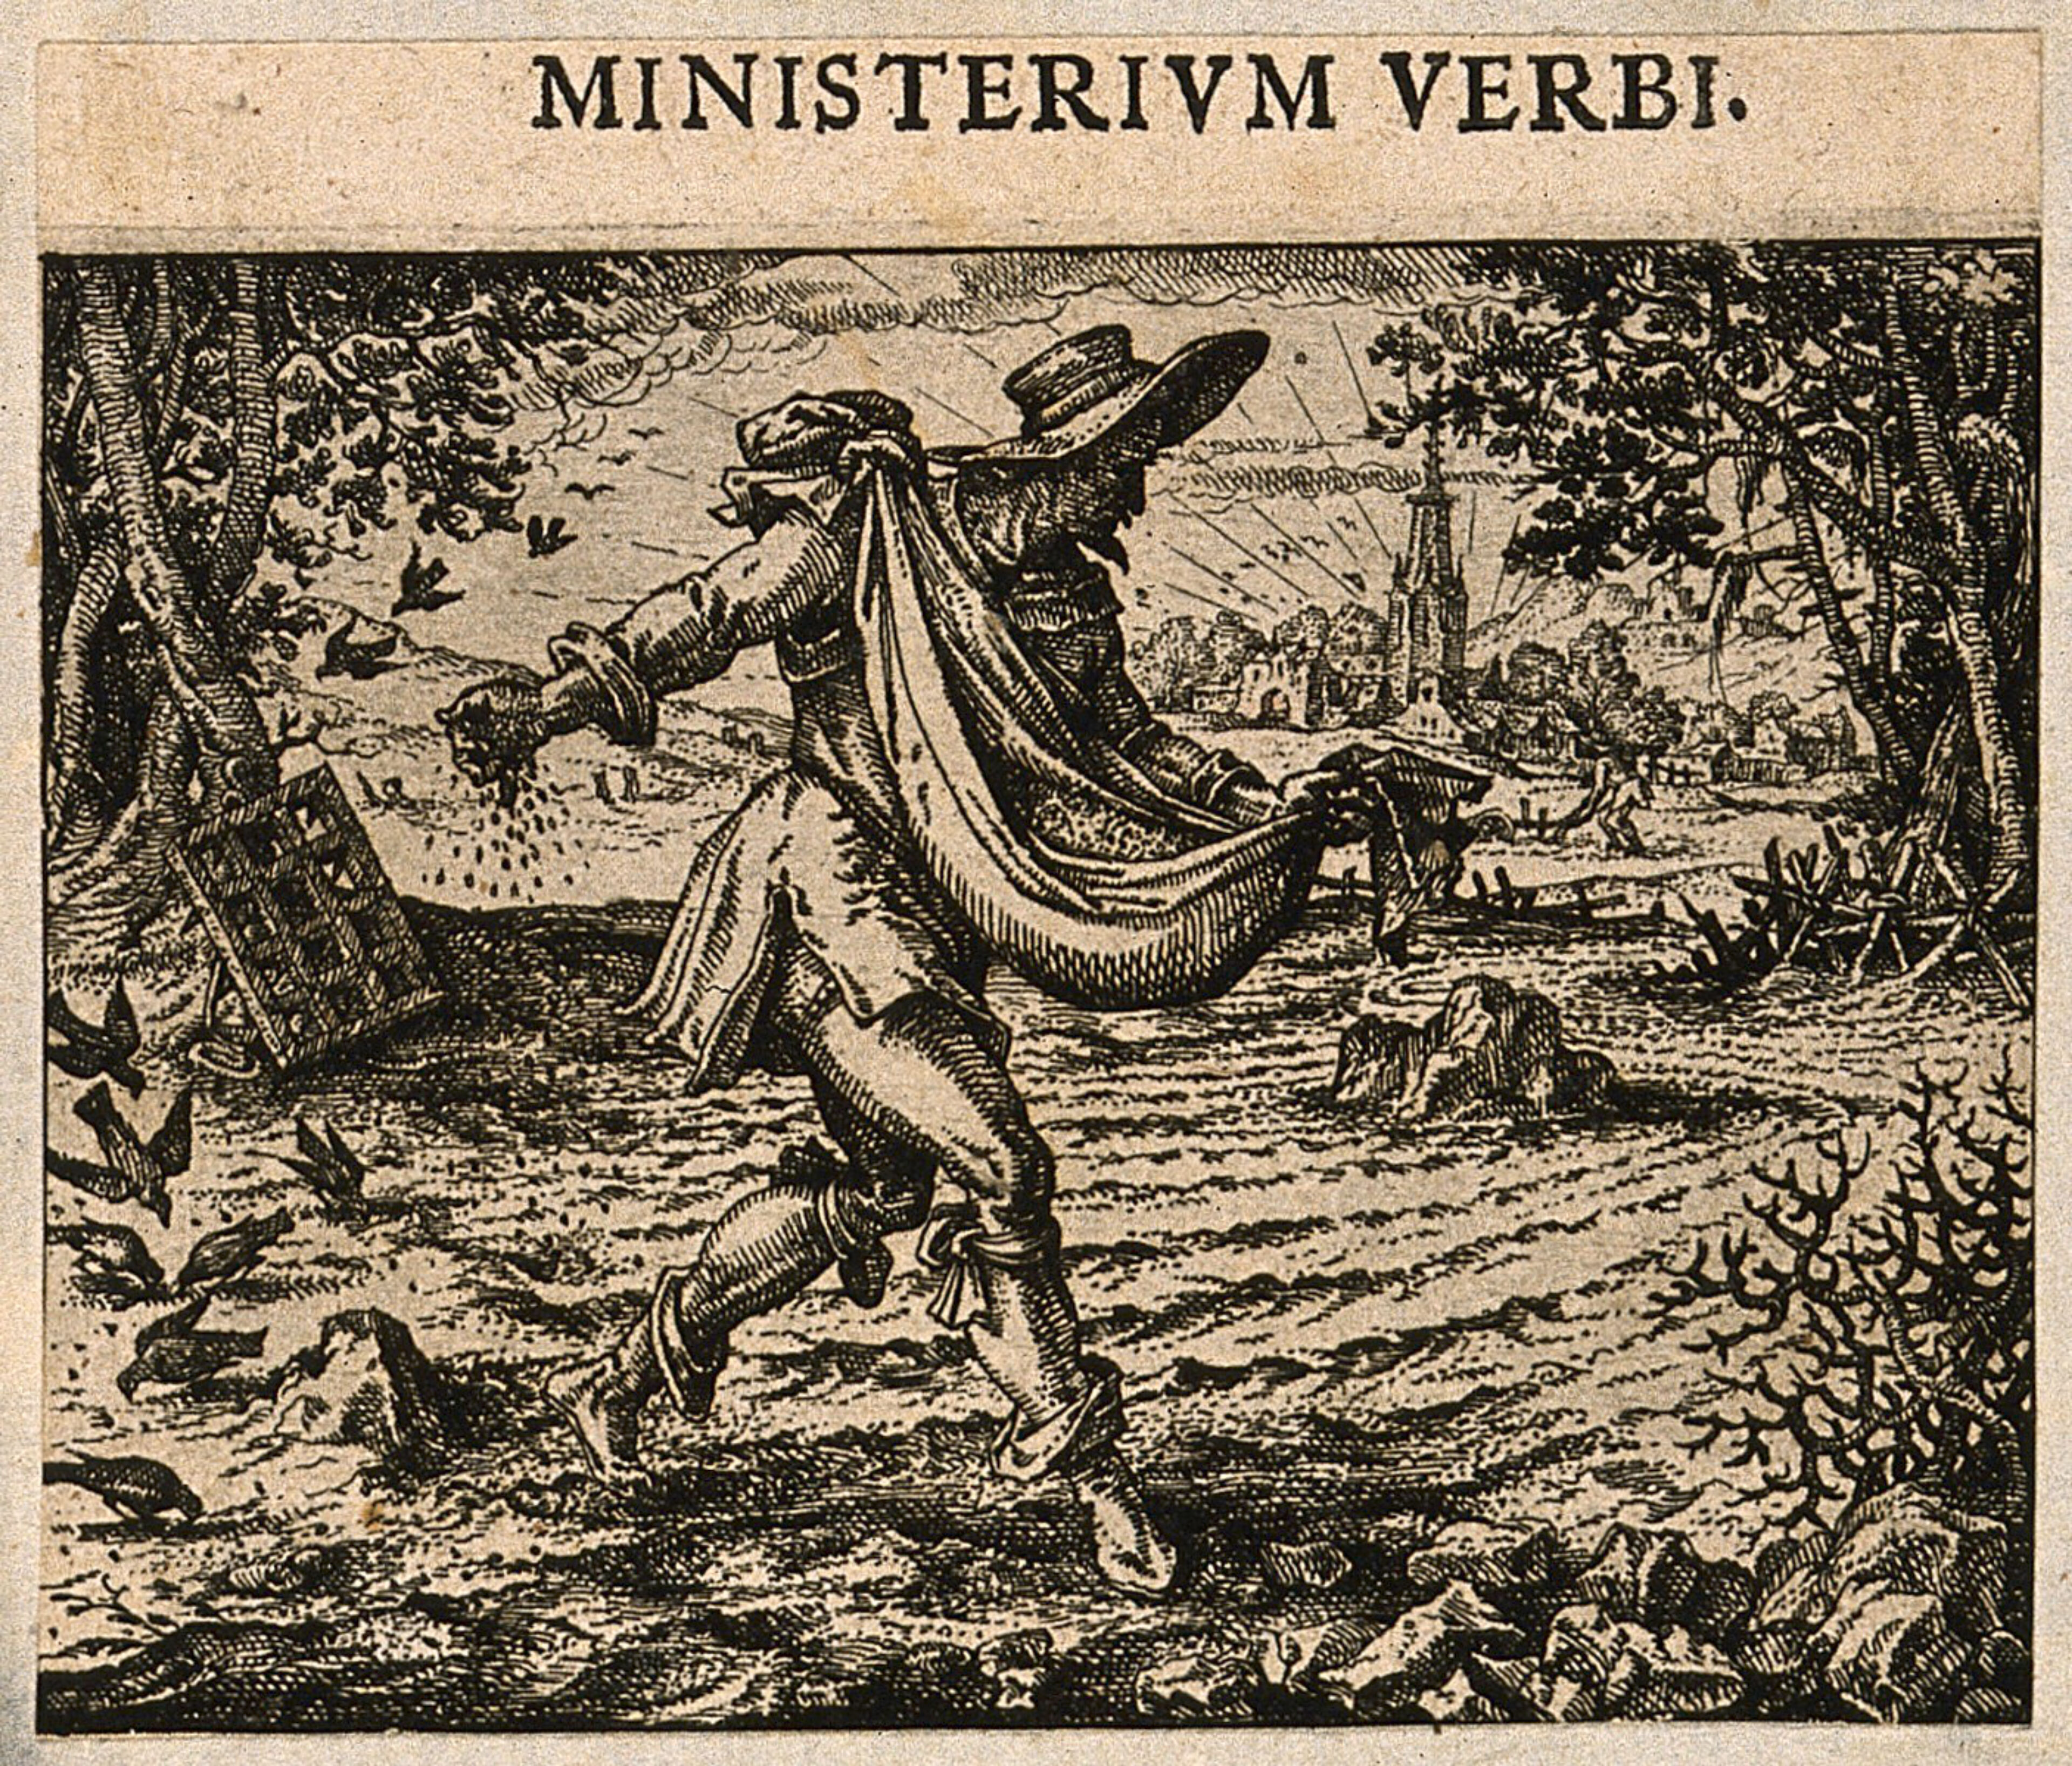 A man scatters seeds; representing the Biblical parable of the sower; here referring to the "ministry of the word", preaching. Etching by C. Murer after himself, c. 1600-1614.